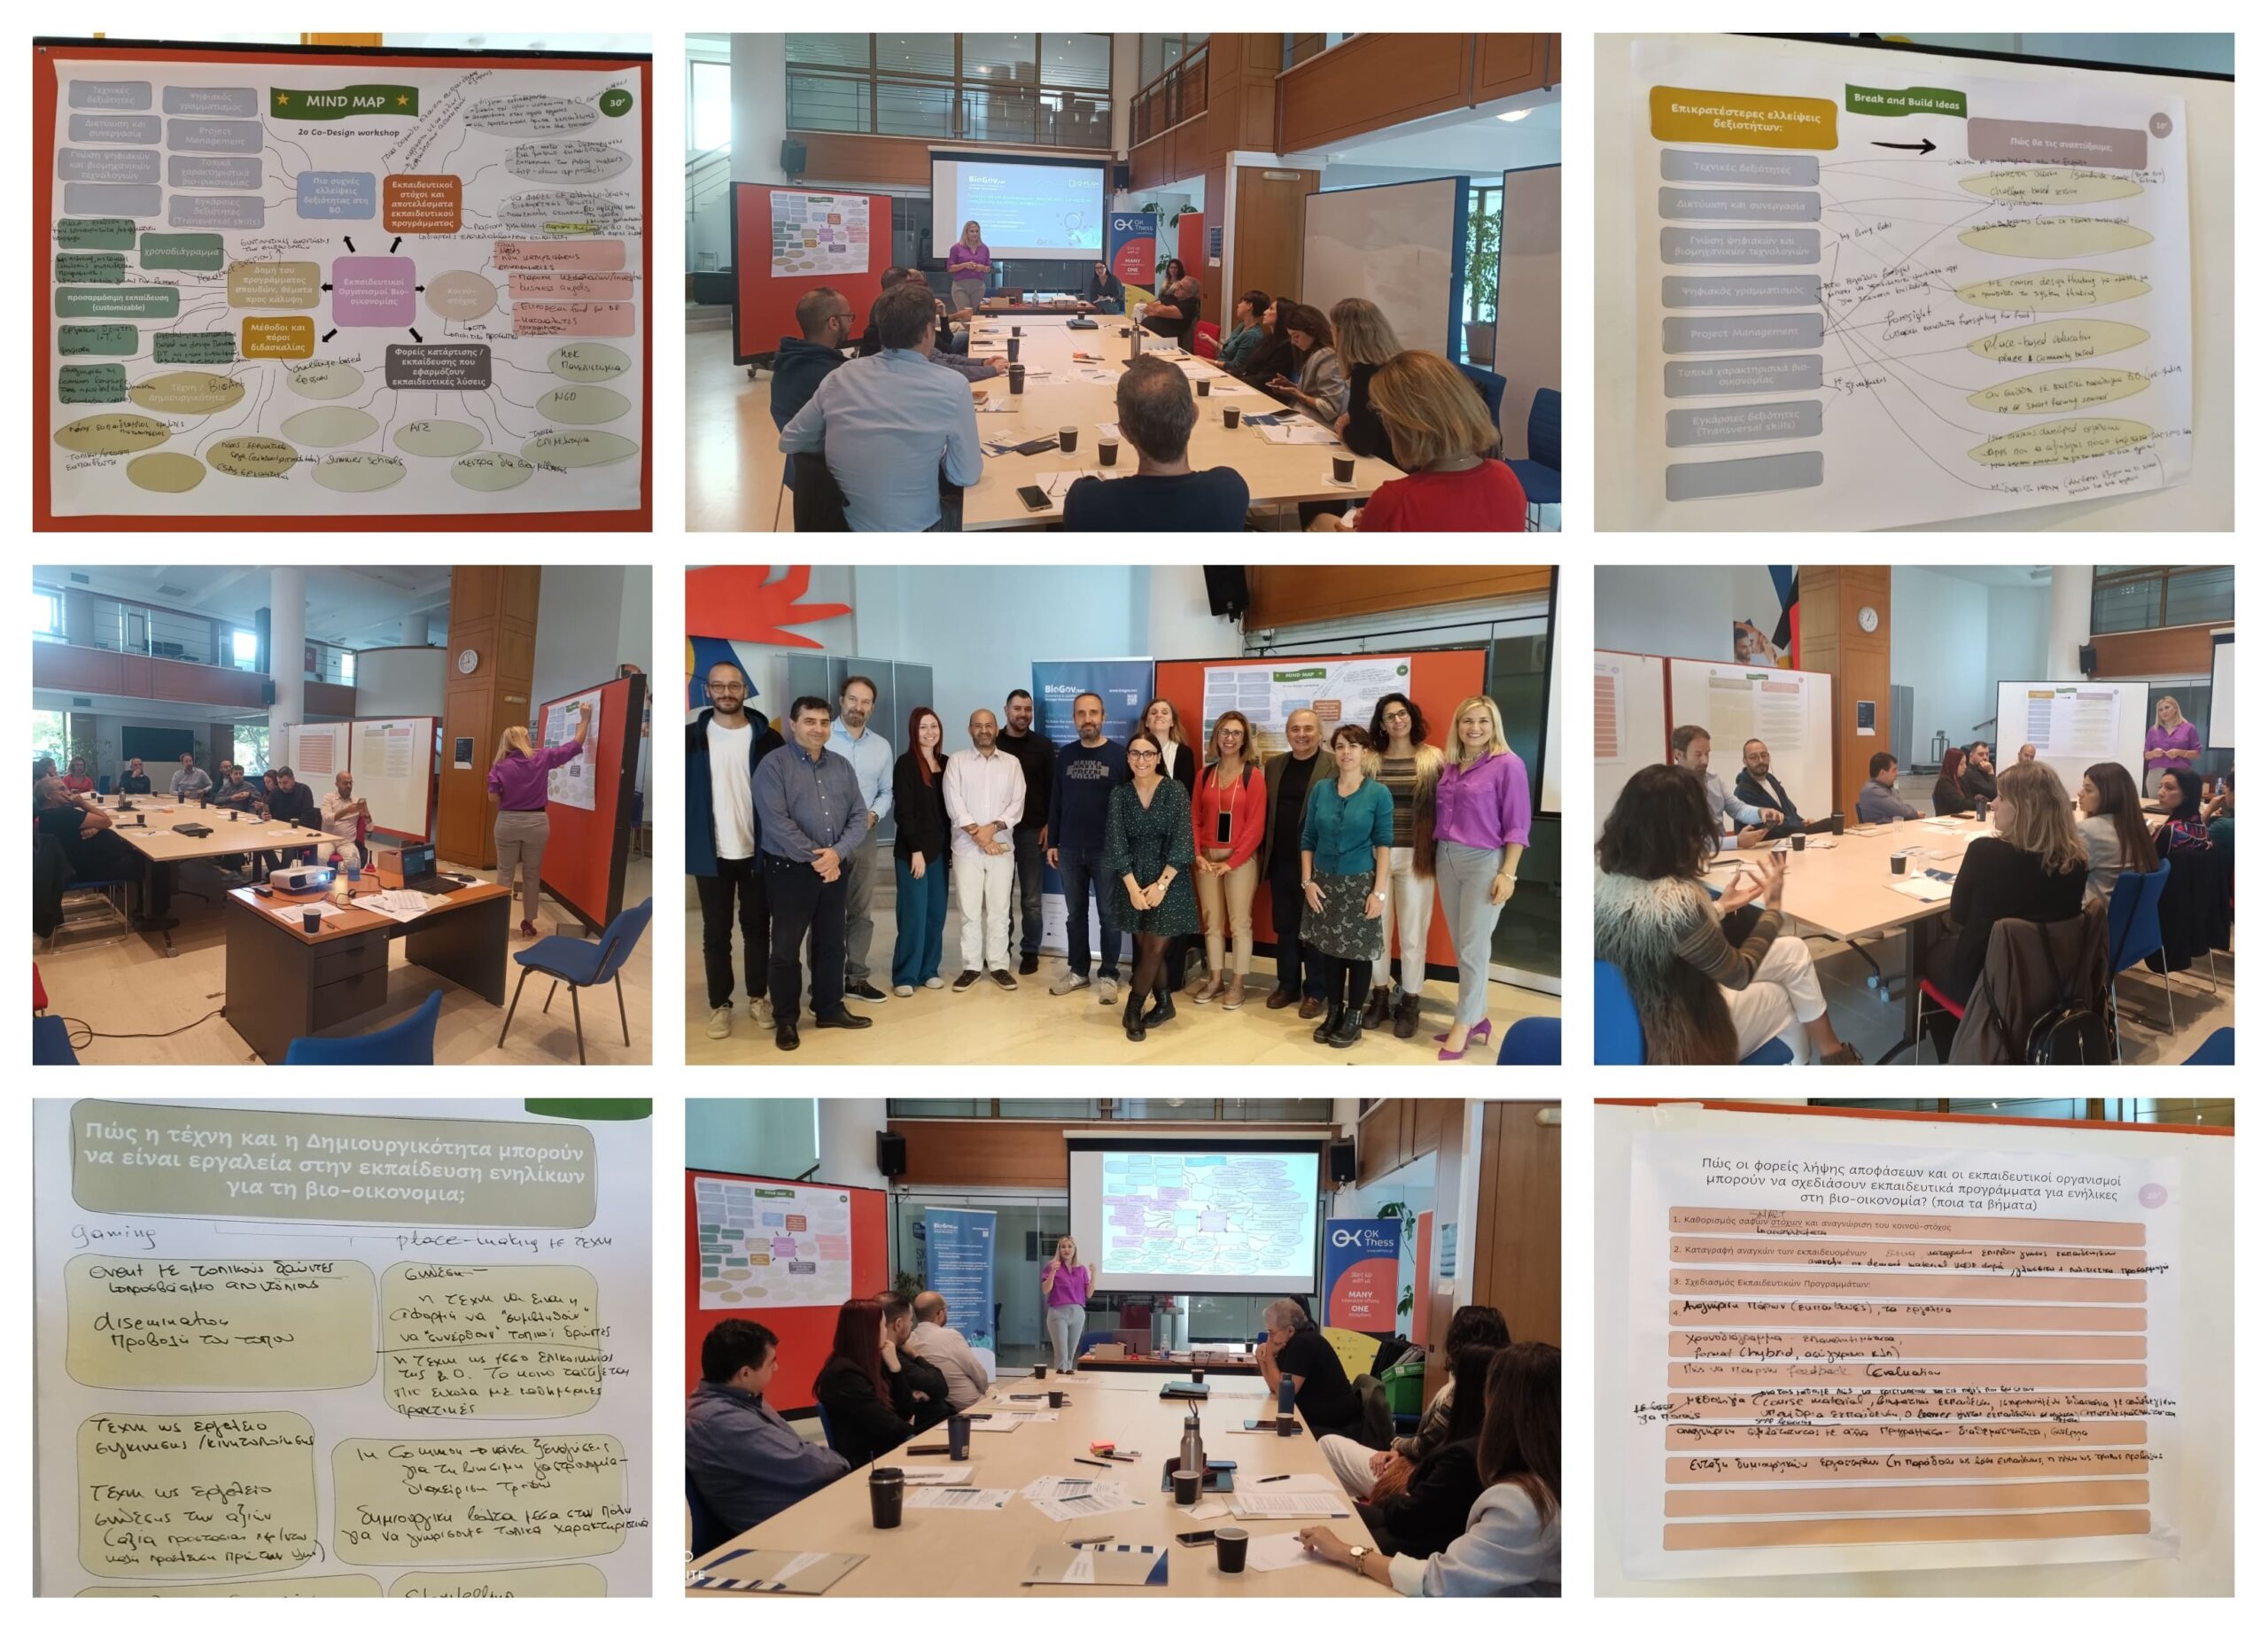 Greek Co-Design workshop “Educational Pathways in Bioeconomy - Directions for training providers and Decision-makers” Image